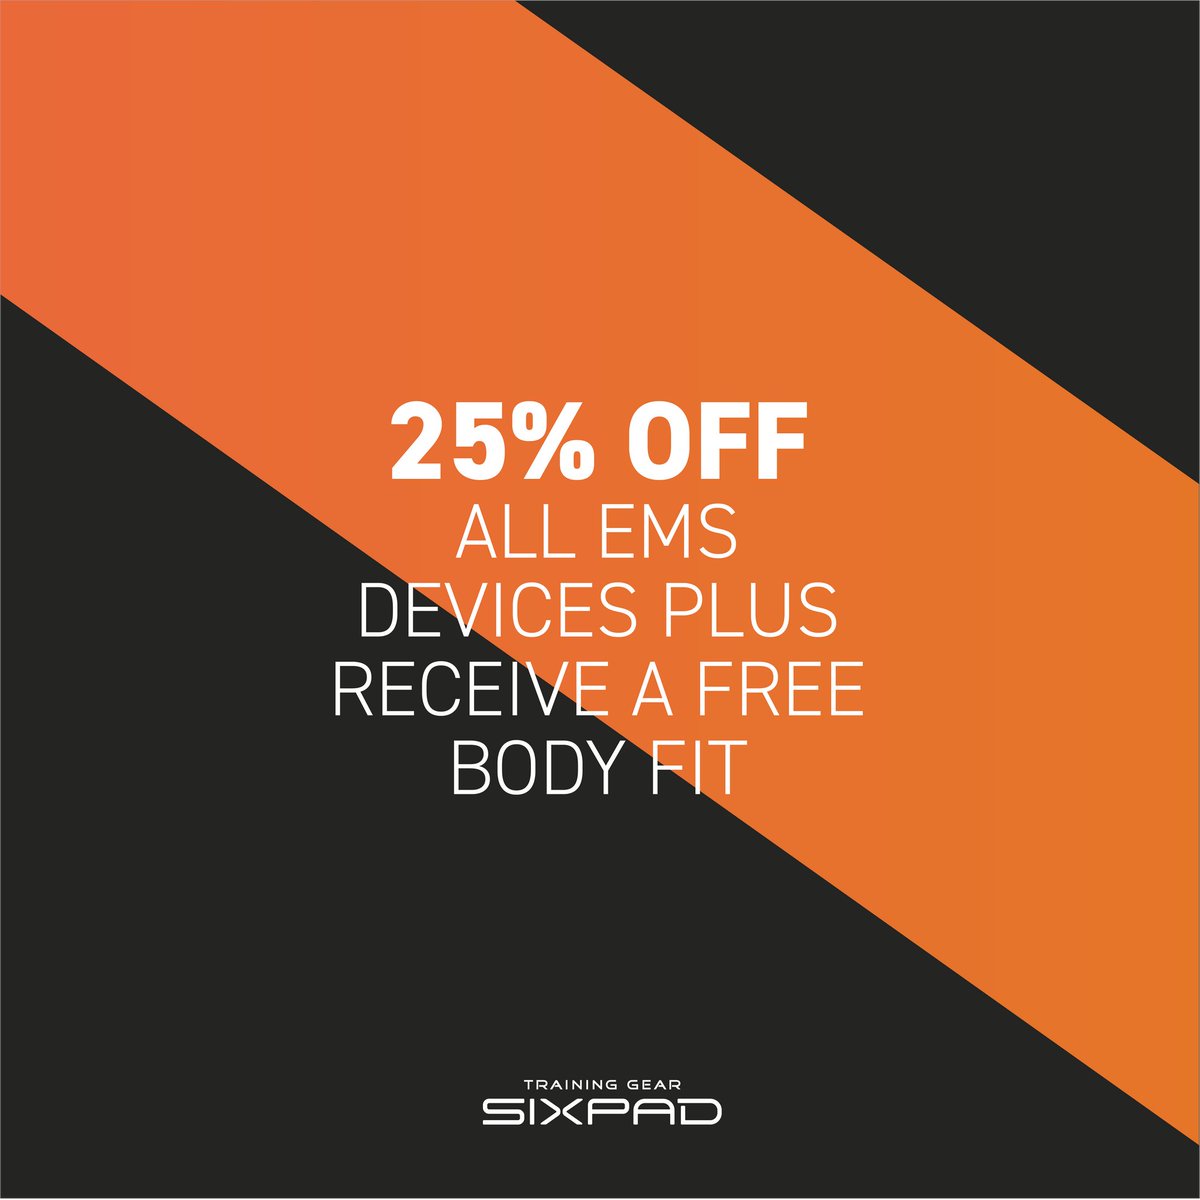 Want some good news? Well... OUR SEPTEMBER FLASH SALE IS HERE! 🎉 It's time to kickstart your EMS fitness journey with your very own SIXPAD device! Everything In our EMS series is 25% off plus you can get yourself a FREE body fit with every purchase! #SixPadEurope